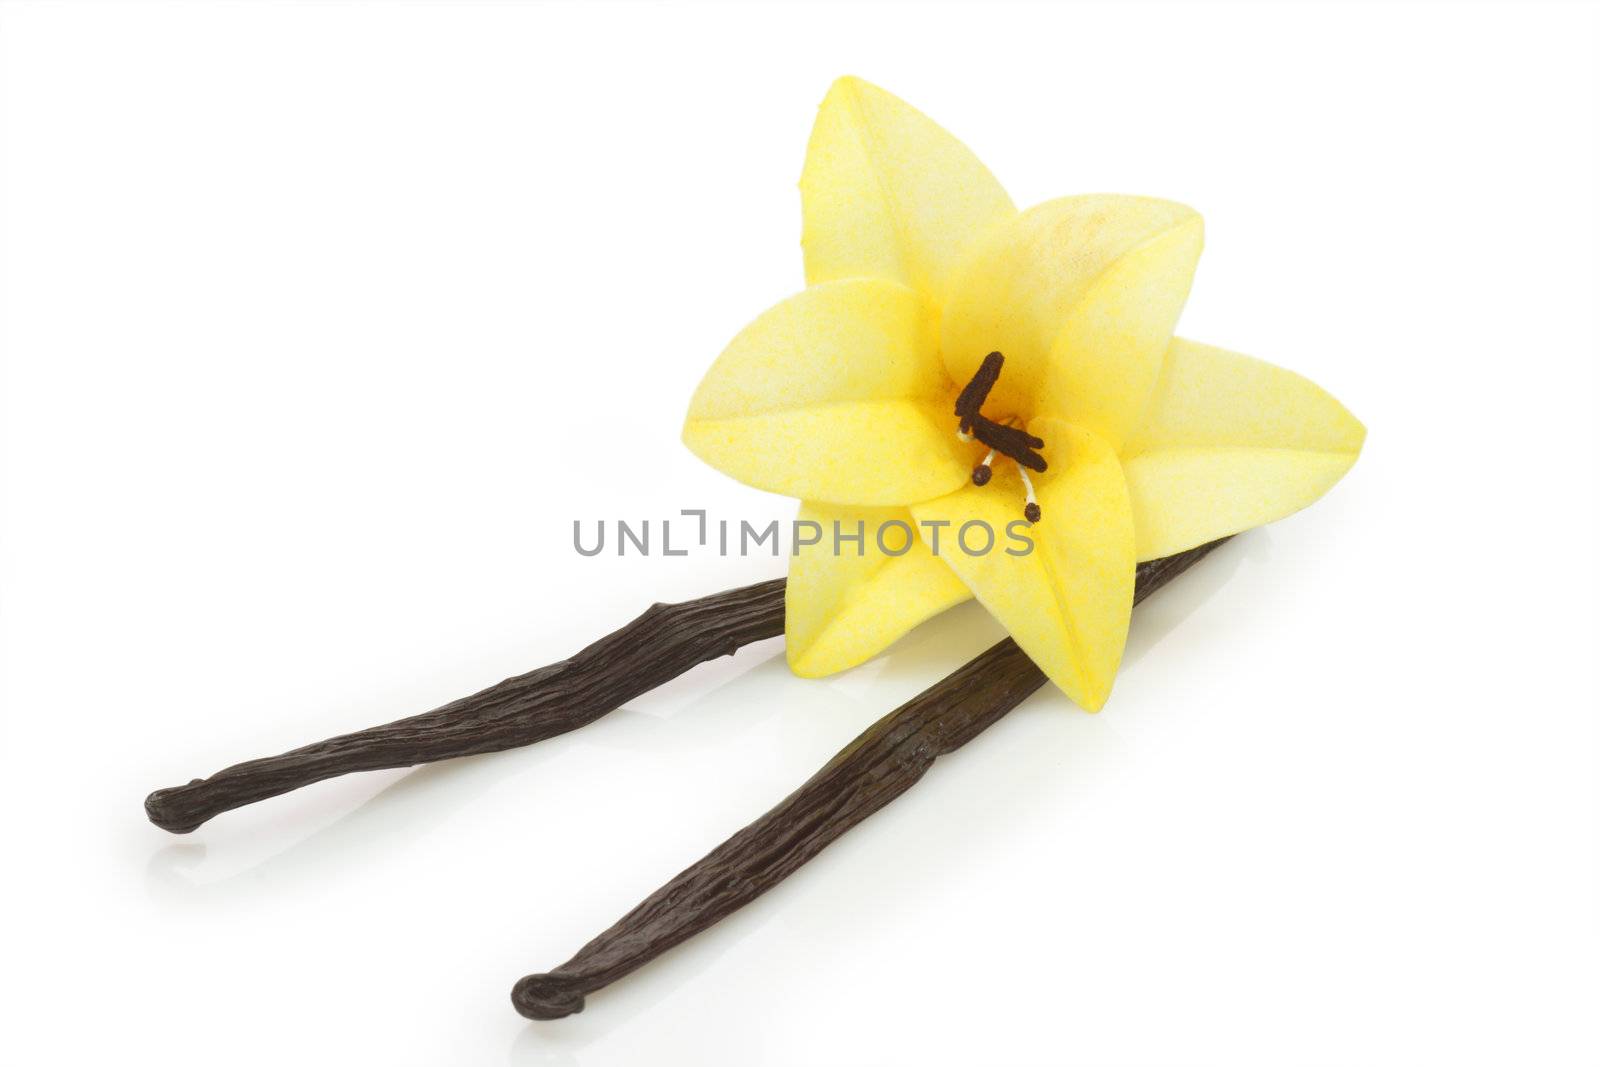 Well dried vanilla beans on white background